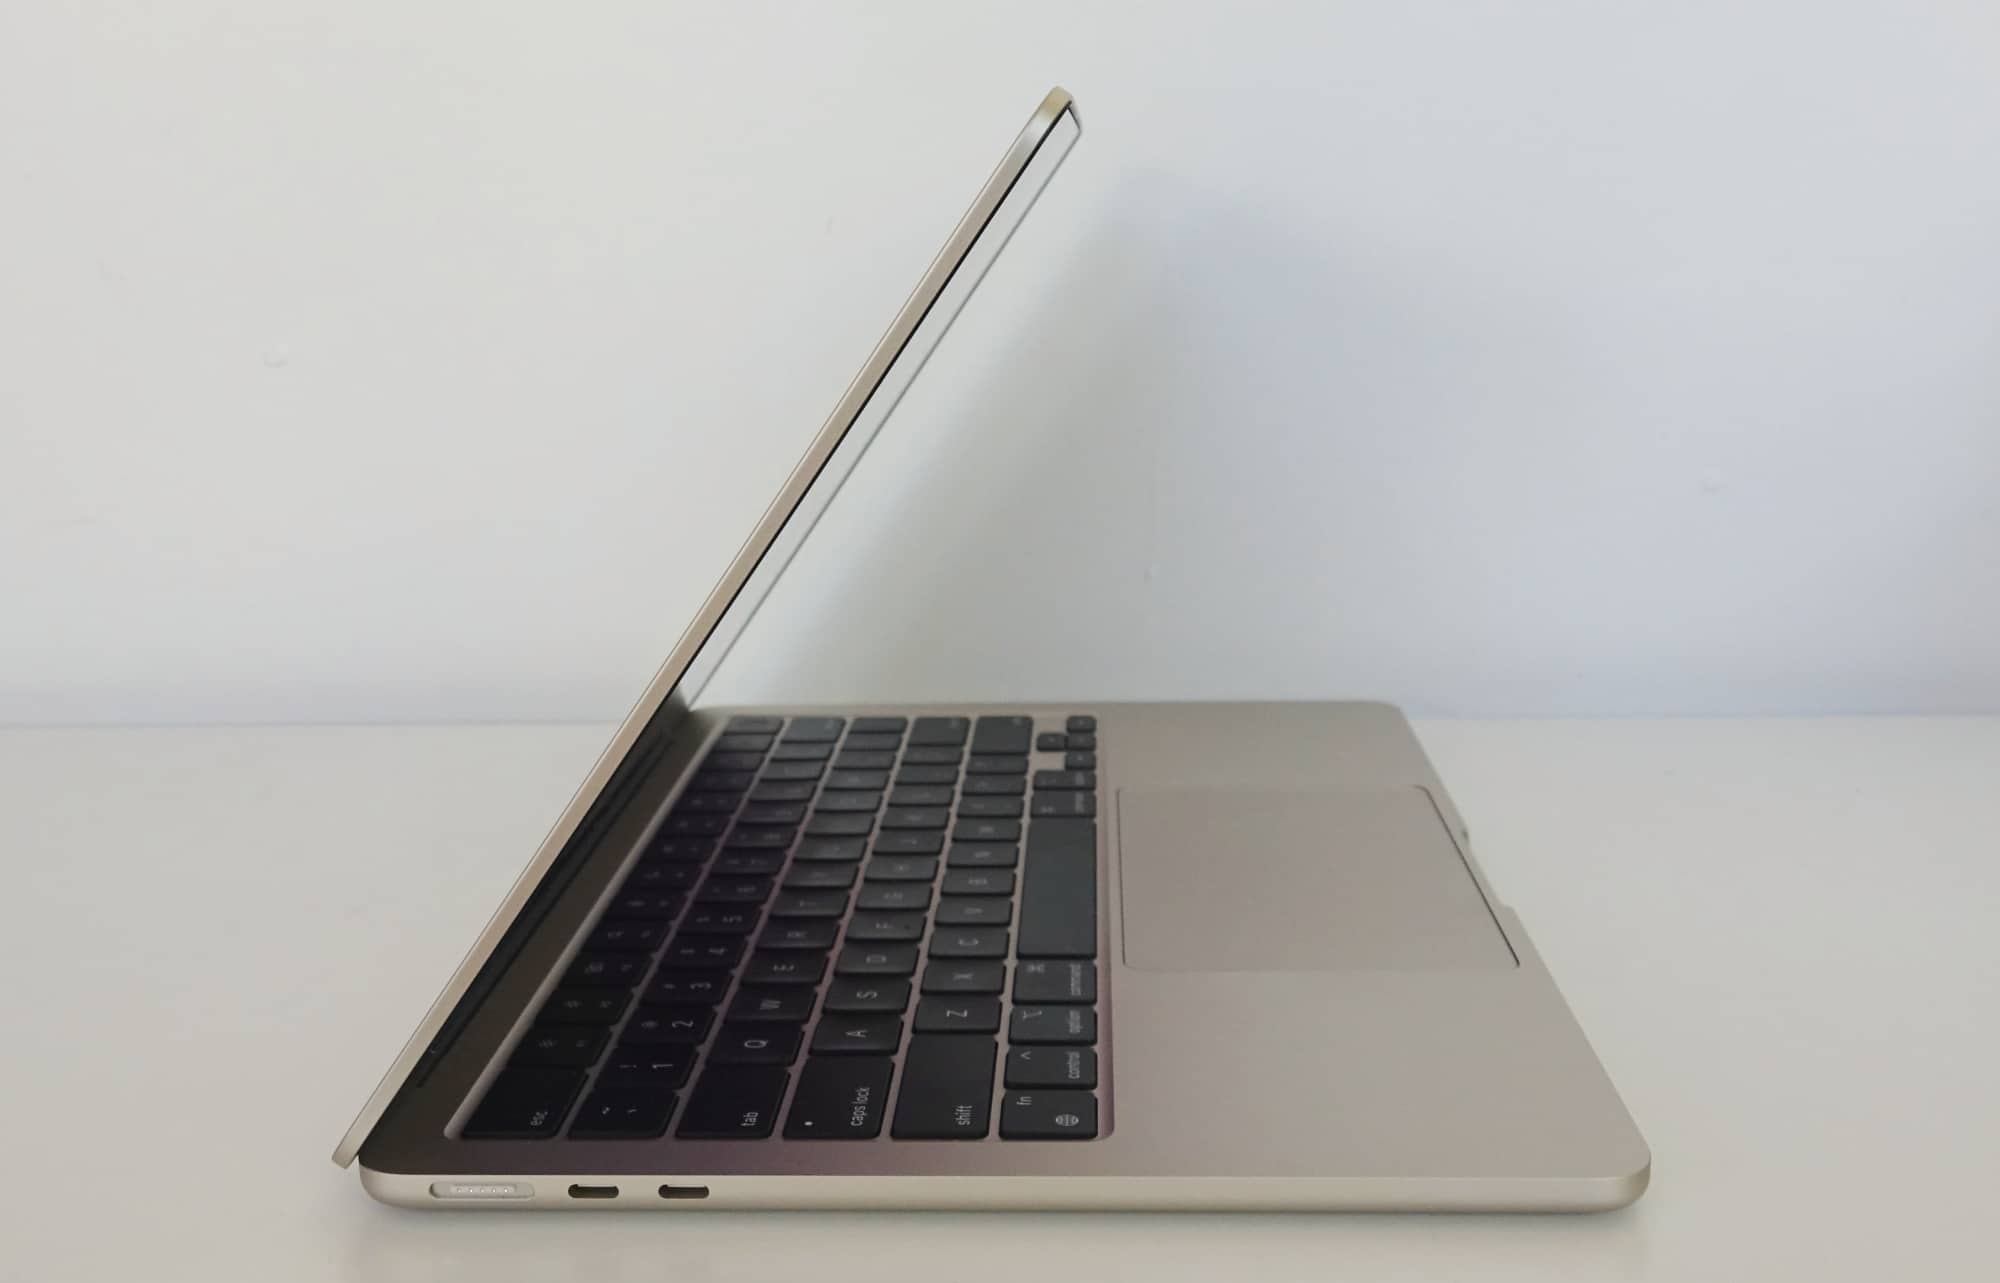 MacBook Air M2 review: The Air has changed